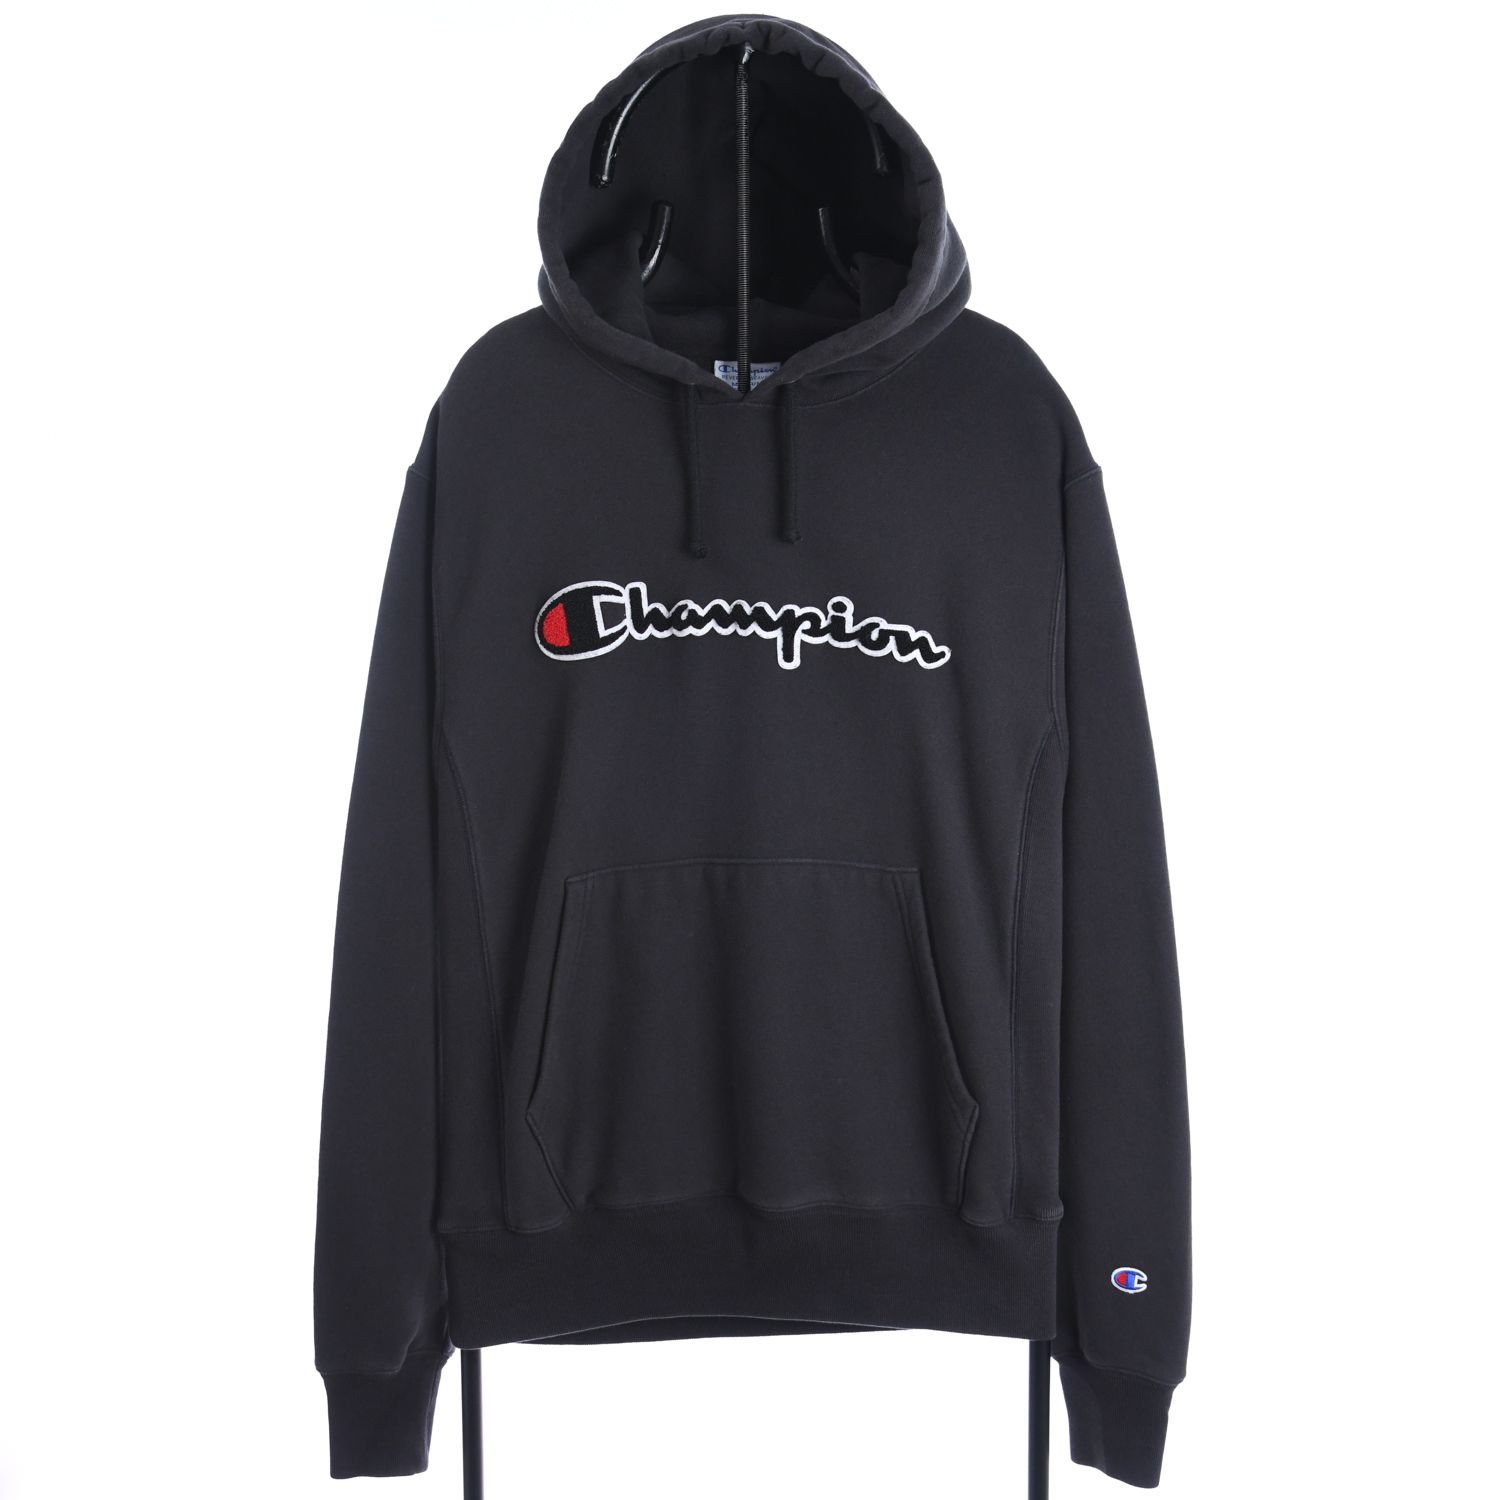 Champion Reverse Weave Black Hoodie With Big spell out